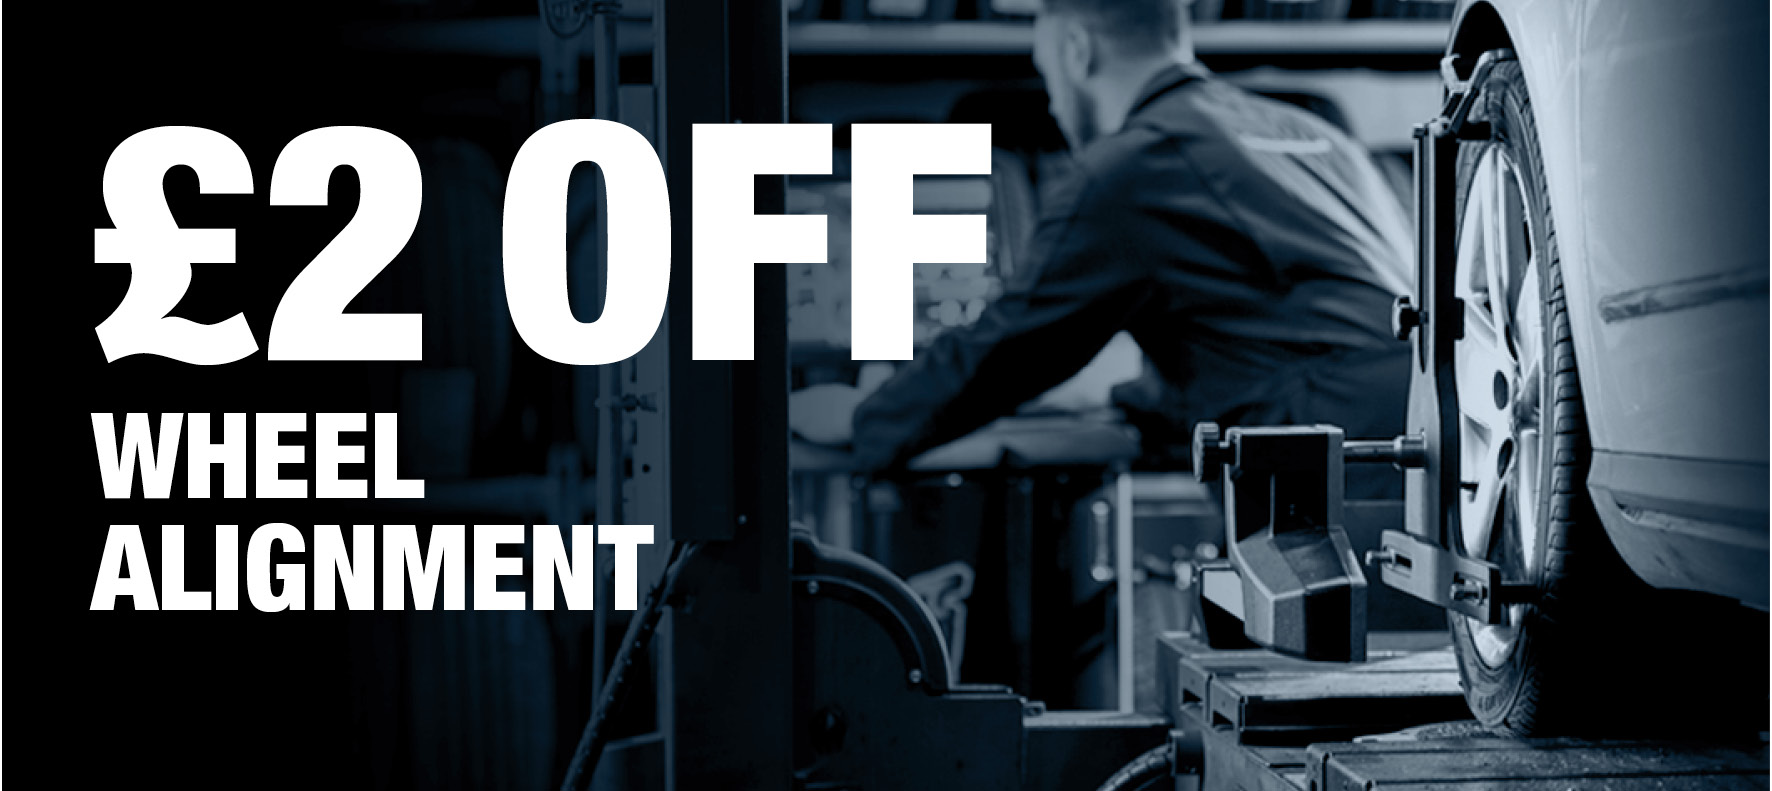 Save £2 on Wheel Alignment at Formula One Autocentres